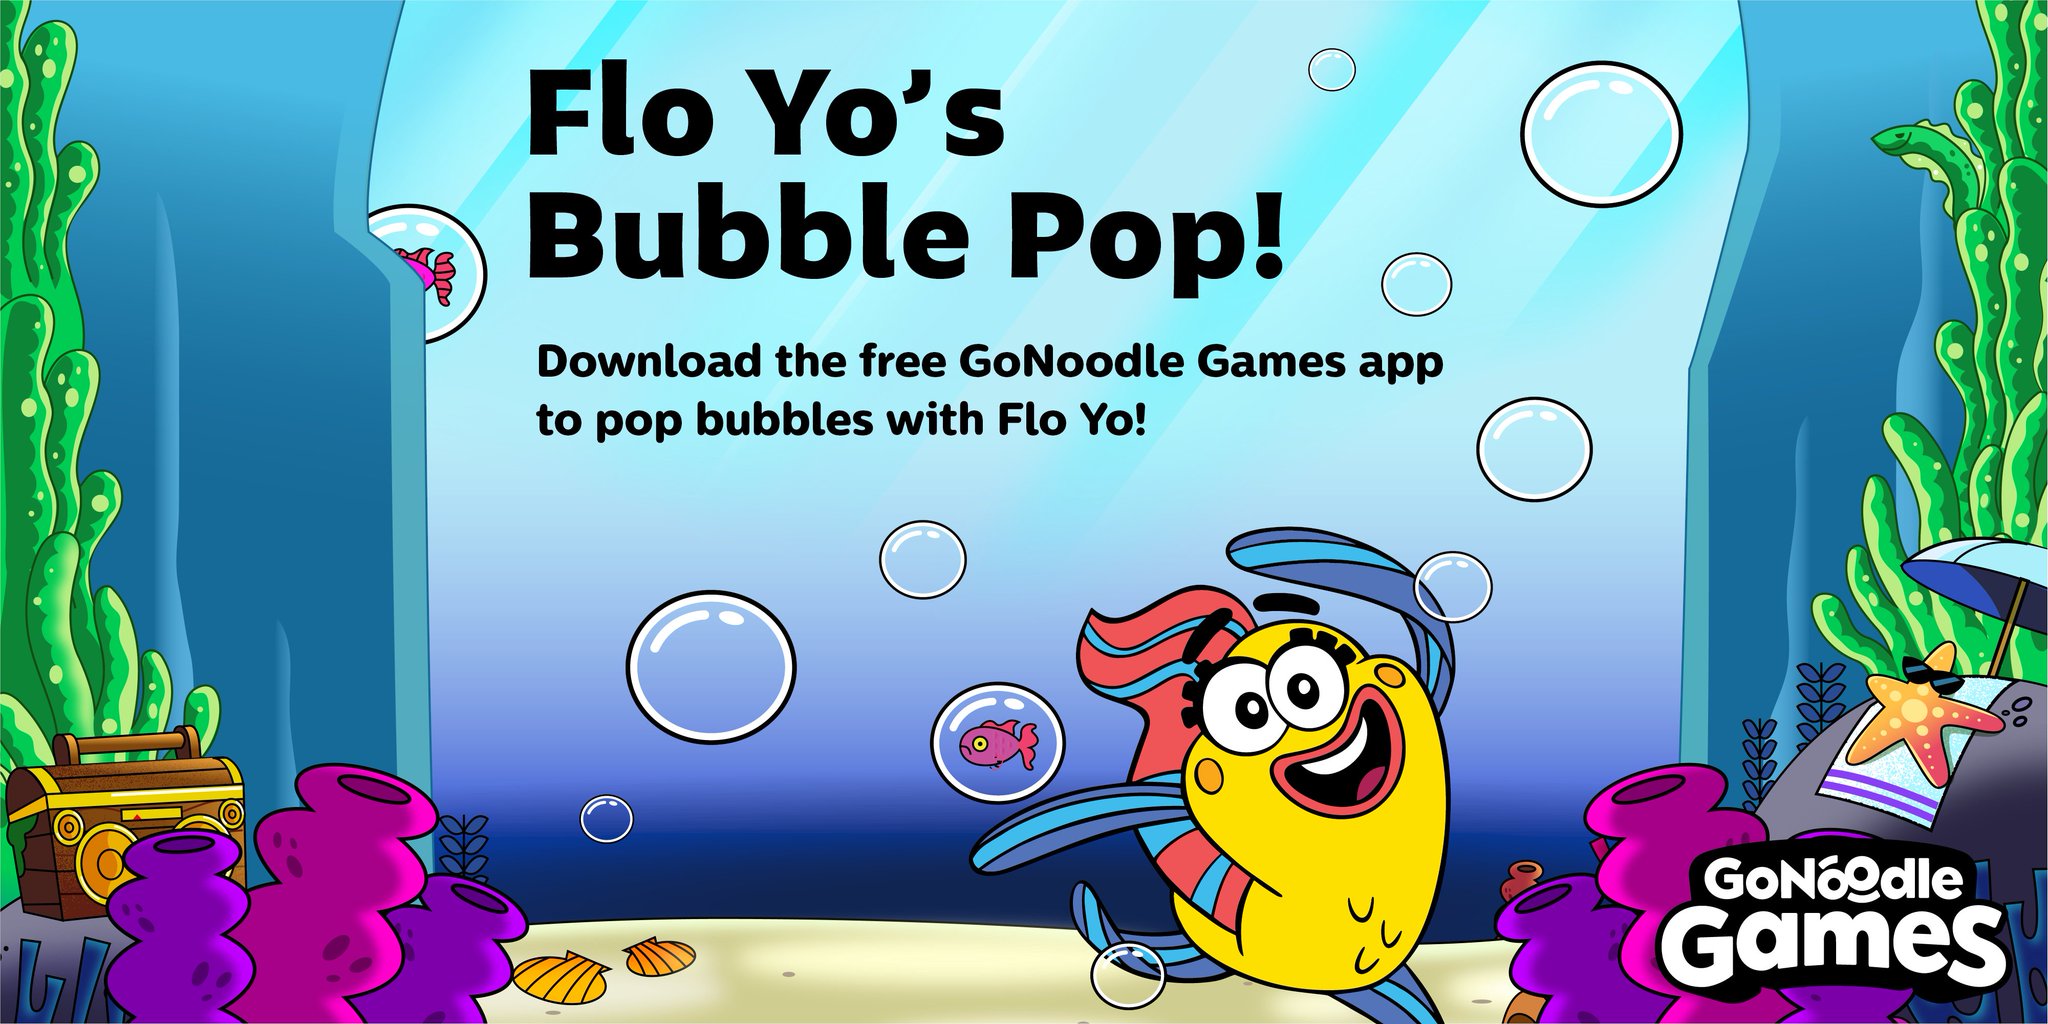 Gonoodle If You Love The New Poppin Bubbles Video Check Out The Flo Yo S Bubble Pop Game In The New Gonoodle Games App Gonoodlegames T Co 4leftw3stp T Co Gtuqklv3gp